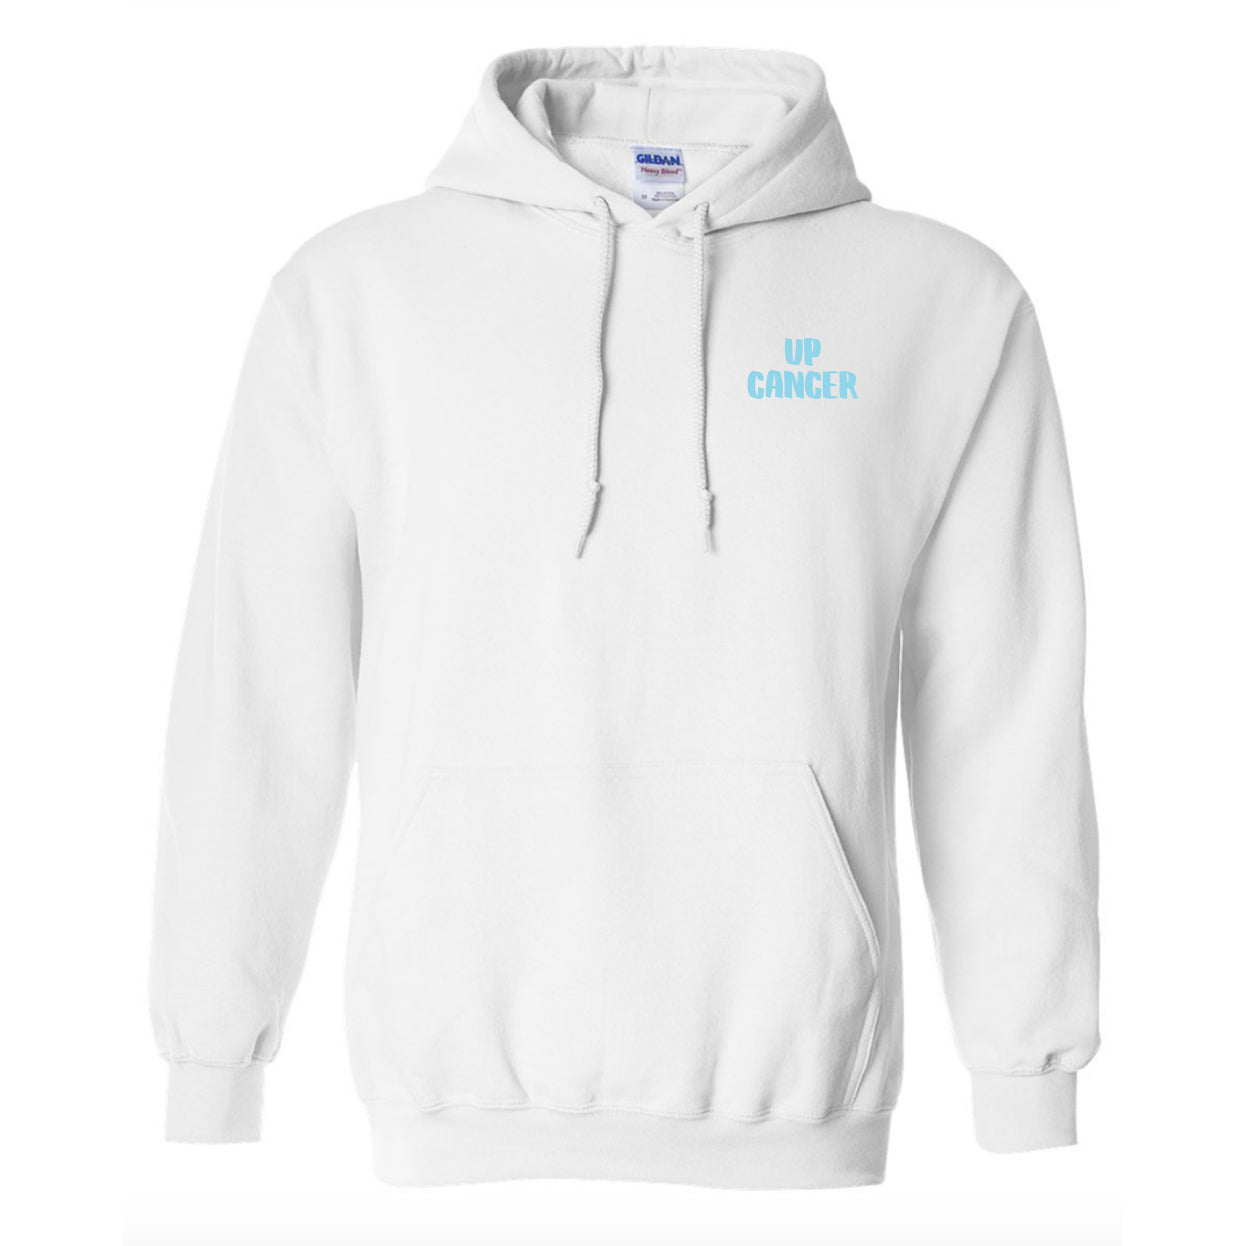 Up Cancer White Hoodie (Listing ID: 6582546858053)